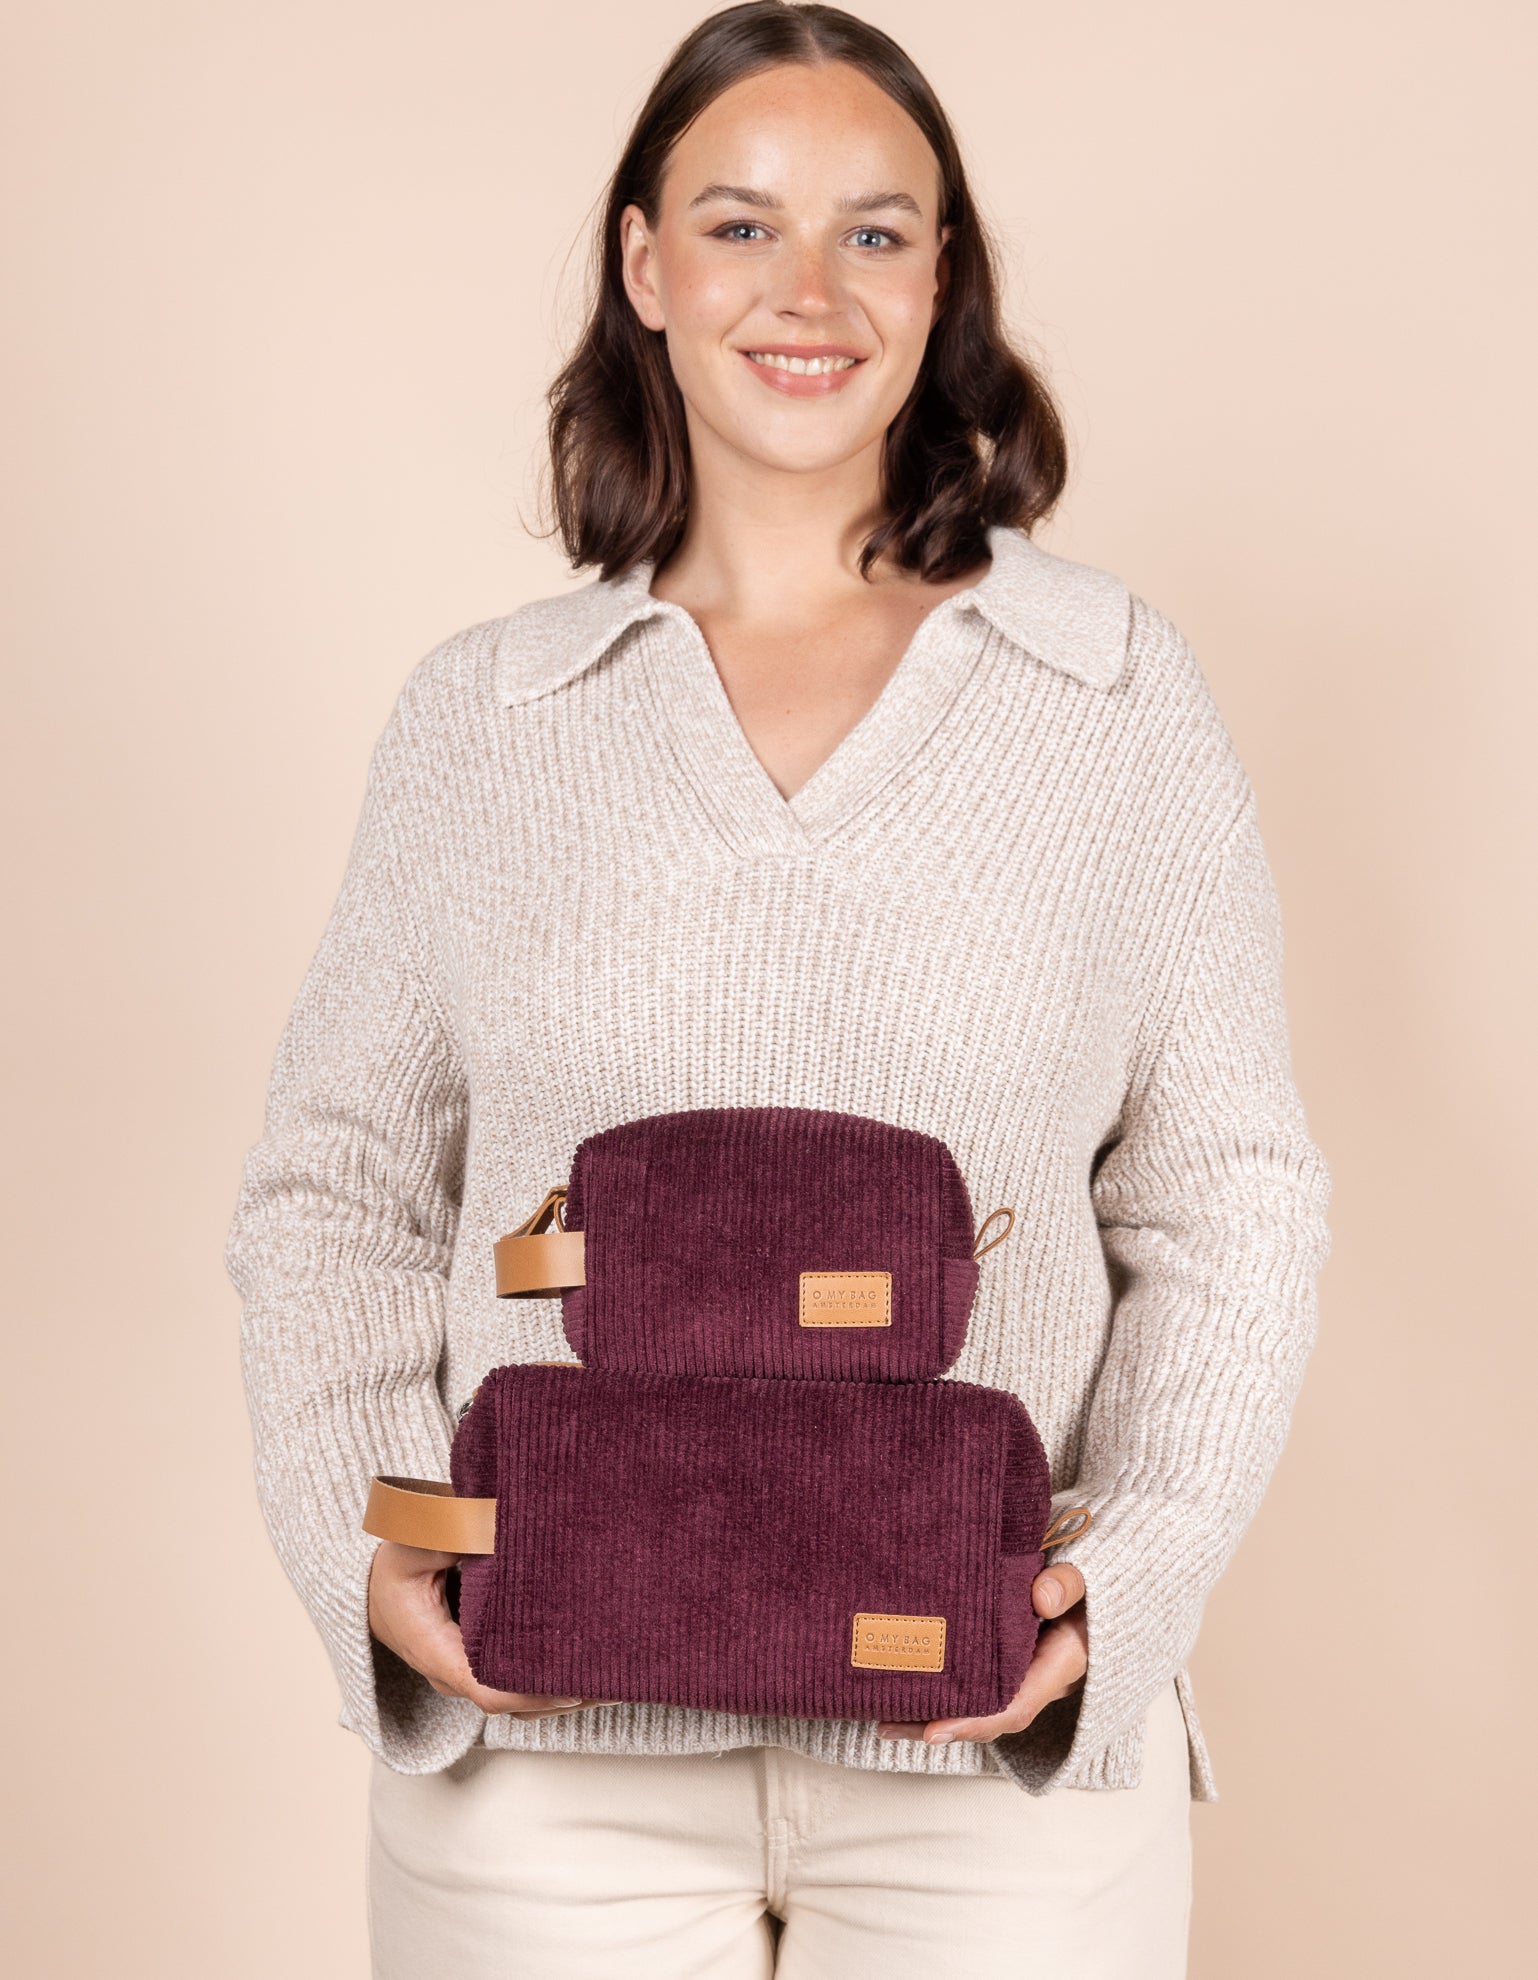 Model holding both Ted Travel cases in corduroy